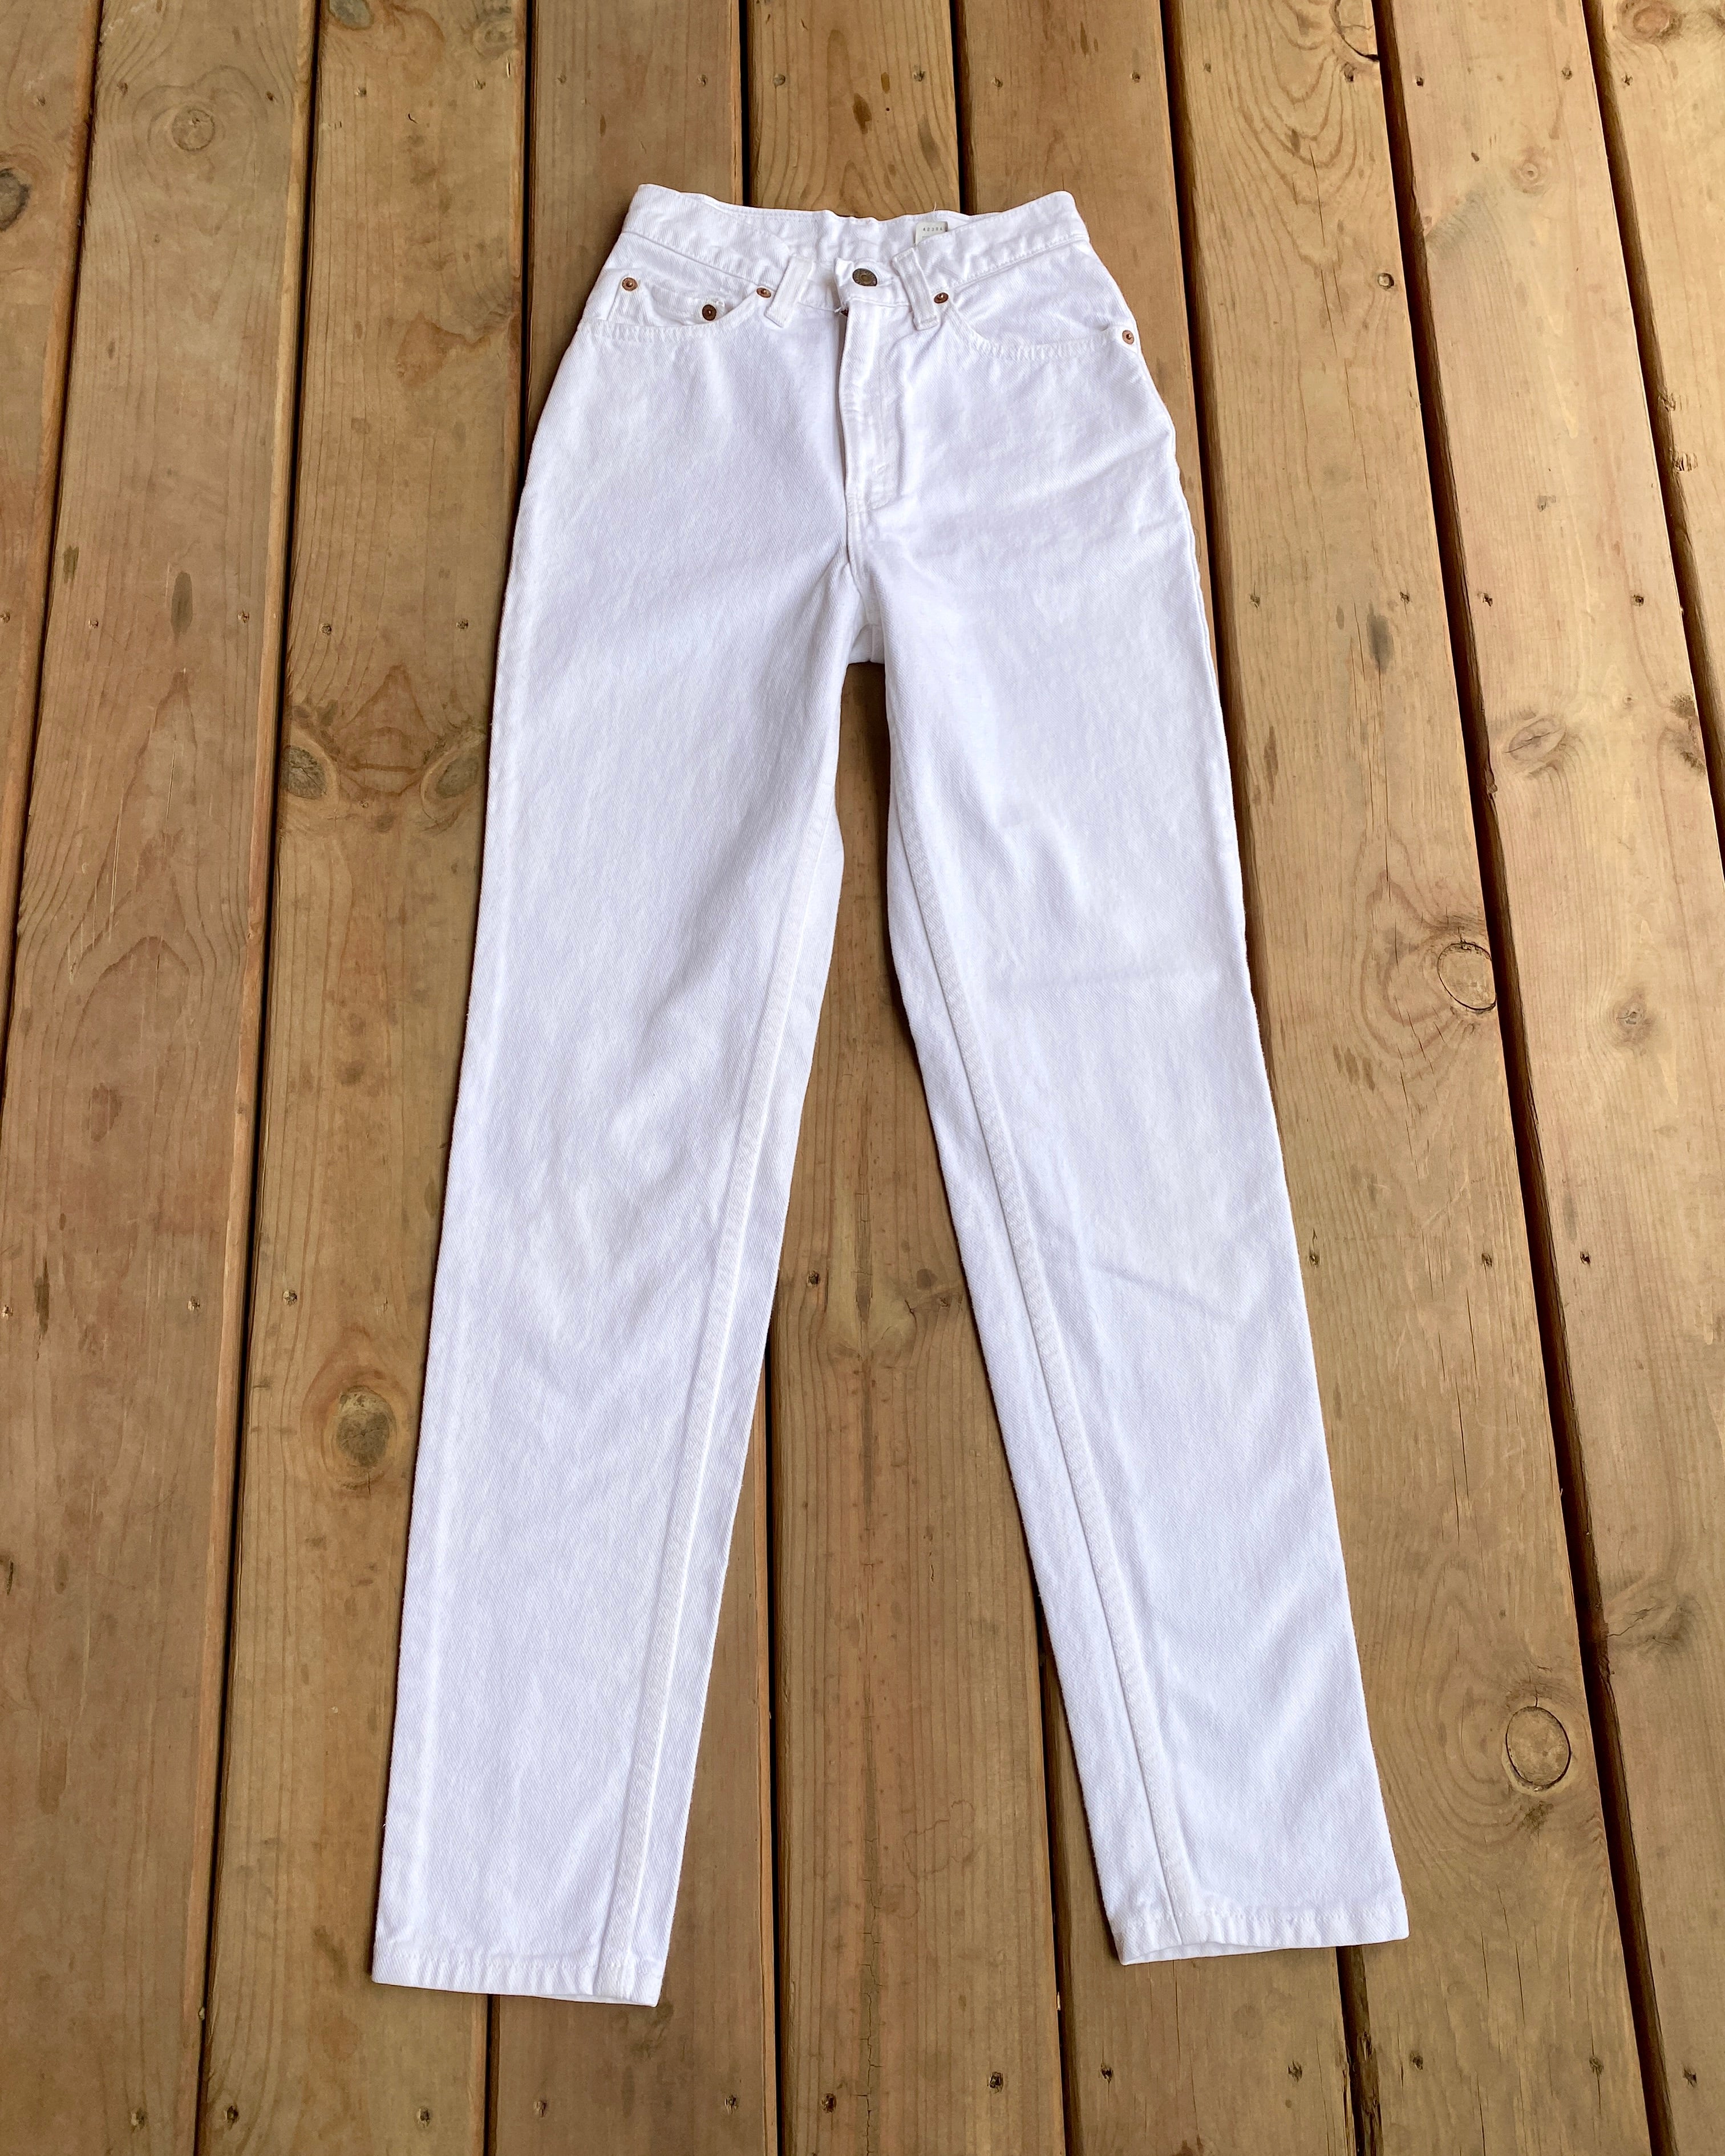 Vintage 1980s Levis 512 Red Tab White Jeans size 24 to 25 Waist Made in USA